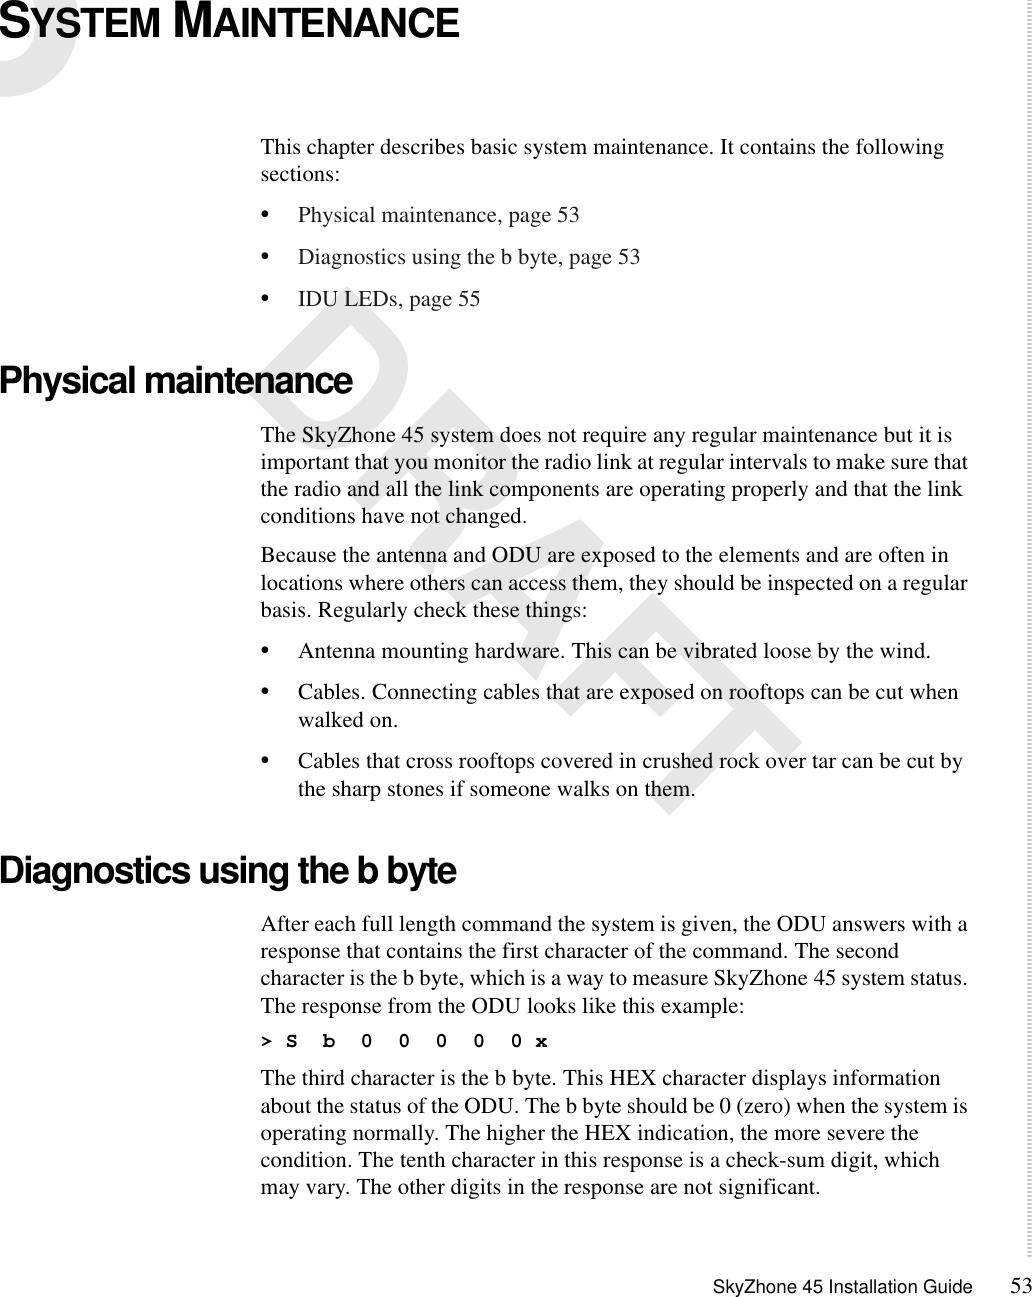 SkyZhone 45 Installation Guide 535 DRAFTSYSTEM MAINTENANCE This chapter describes basic system maintenance. It contains the following sections:•Physical maintenance, page 53•Diagnostics using the b byte, page 53•IDU LEDs, page 55Physical maintenanceThe SkyZhone 45 system does not require any regular maintenance but it is important that you monitor the radio link at regular intervals to make sure that the radio and all the link components are operating properly and that the link conditions have not changed.Because the antenna and ODU are exposed to the elements and are often in locations where others can access them, they should be inspected on a regular basis. Regularly check these things:•Antenna mounting hardware. This can be vibrated loose by the wind.•Cables. Connecting cables that are exposed on rooftops can be cut when walked on.•Cables that cross rooftops covered in crushed rock over tar can be cut by the sharp stones if someone walks on them. Diagnostics using the b byteAfter each full length command the system is given, the ODU answers with a response that contains the first character of the command. The second character is the b byte, which is a way to measure SkyZhone 45 system status. The response from the ODU looks like this example:&gt; S  b  0  0  0  0  0 xThe third character is the b byte. This HEX character displays information about the status of the ODU. The b byte should be 0 (zero) when the system is operating normally. The higher the HEX indication, the more severe the condition. The tenth character in this response is a check-sum digit, which may vary. The other digits in the response are not significant. 